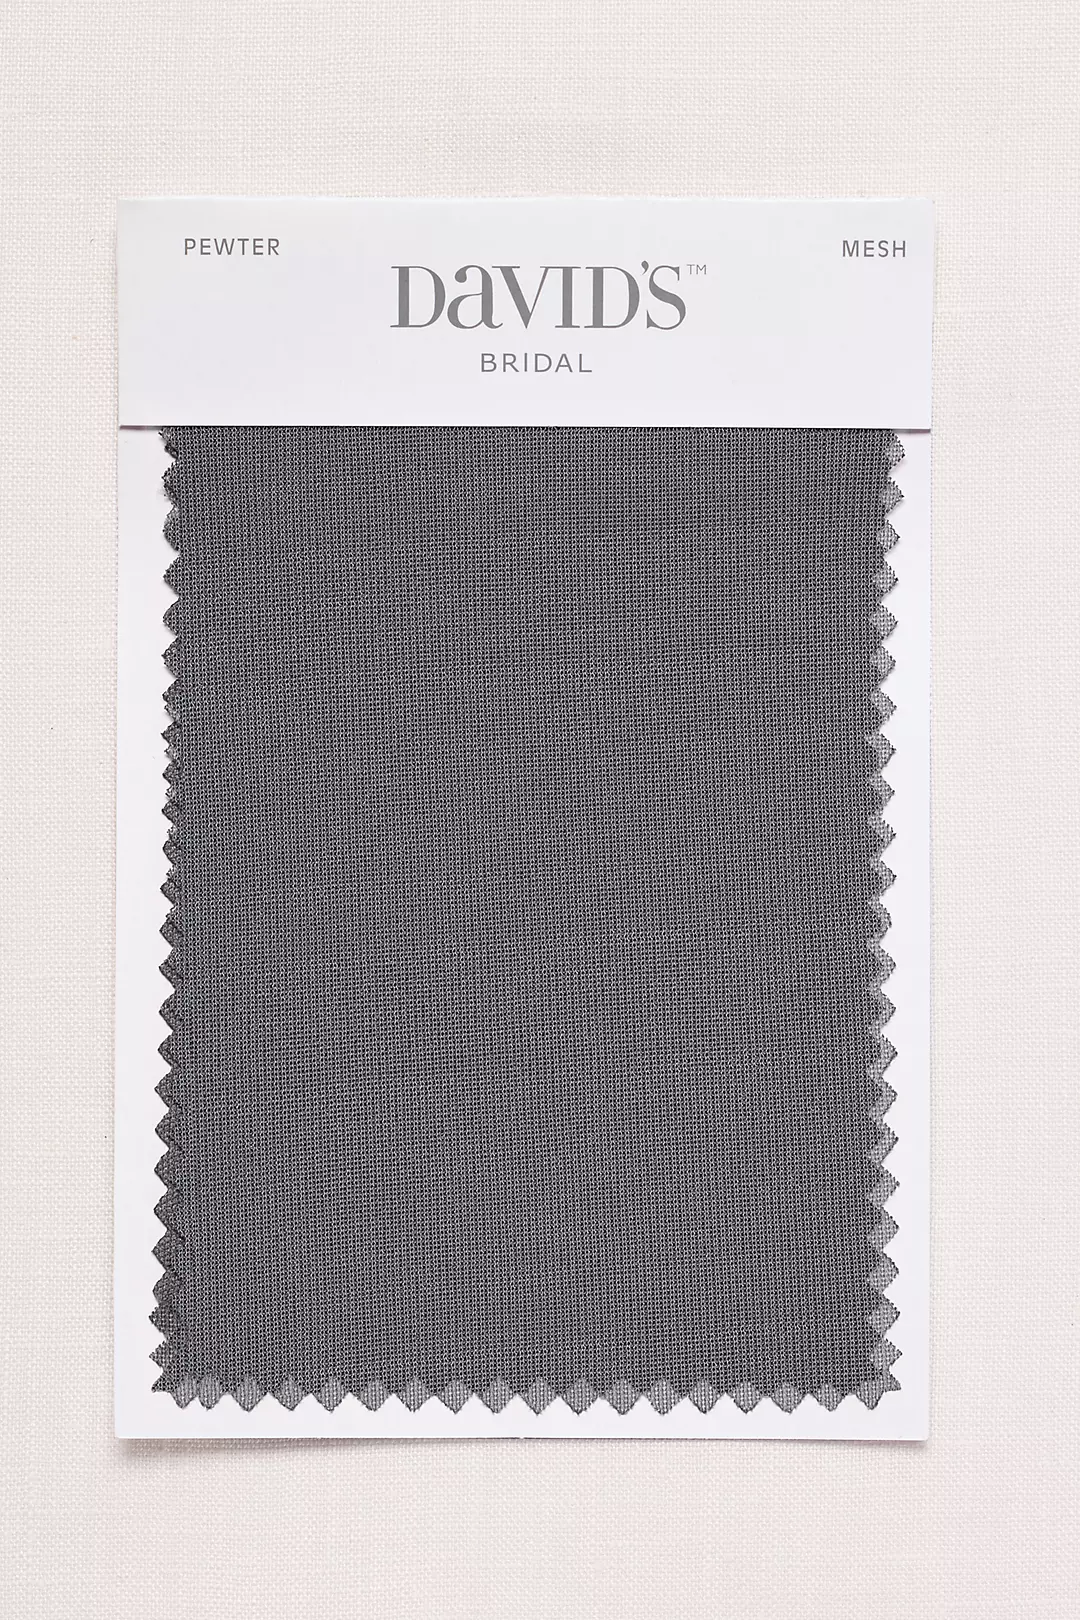 Pewter Fabric Swatch Image